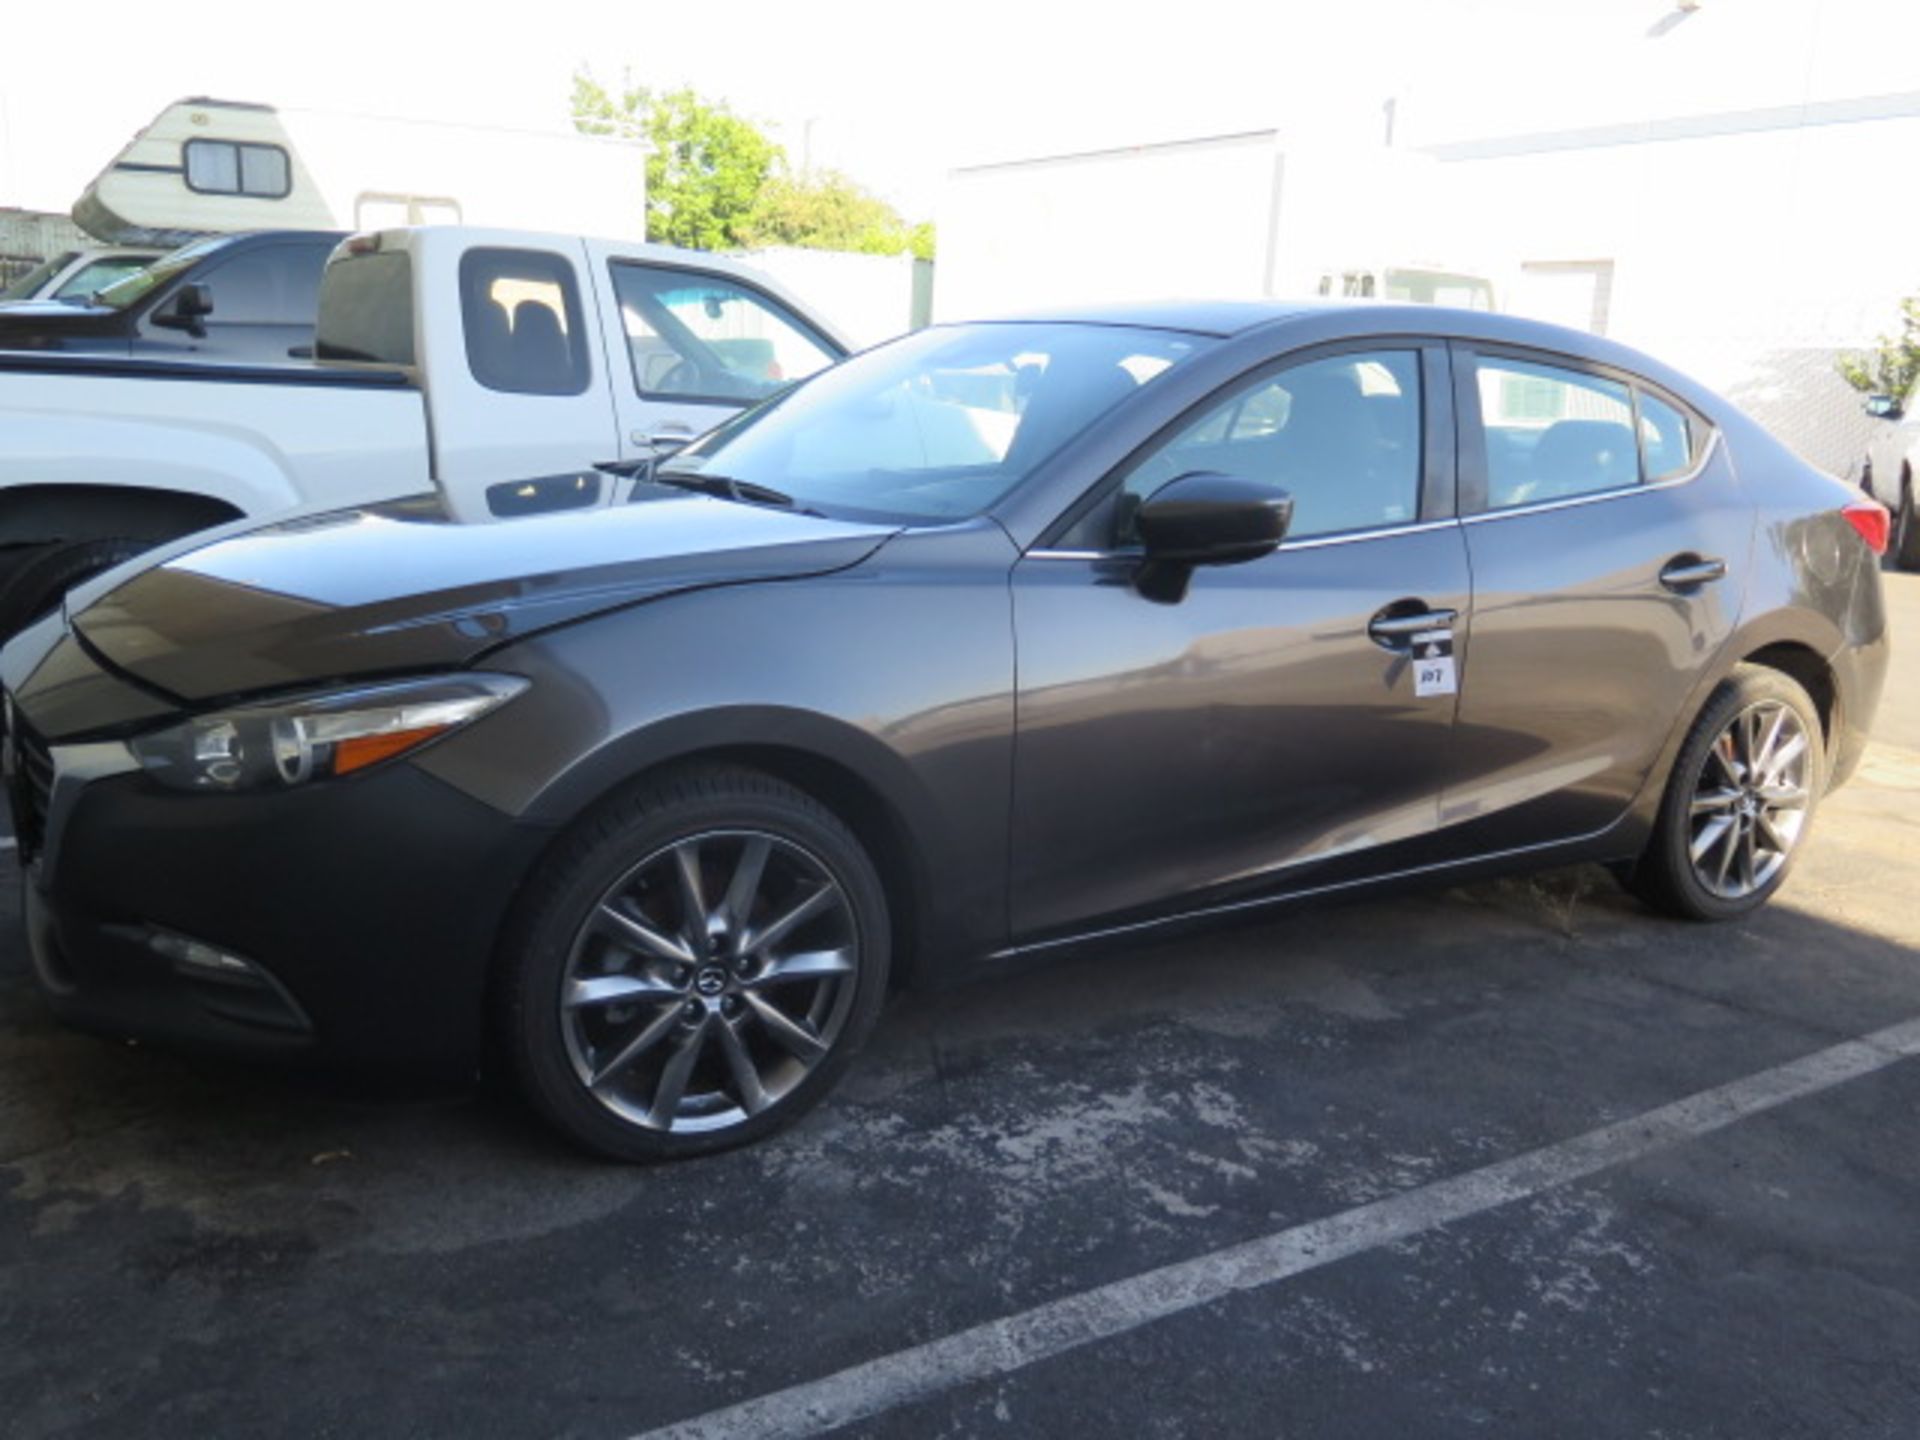 2018 Mazda 3 4-Door Sedan Lisc# 8CNY428 w/Gas Engine, Automatic Trans, Front End Damage, SOLD AS IS